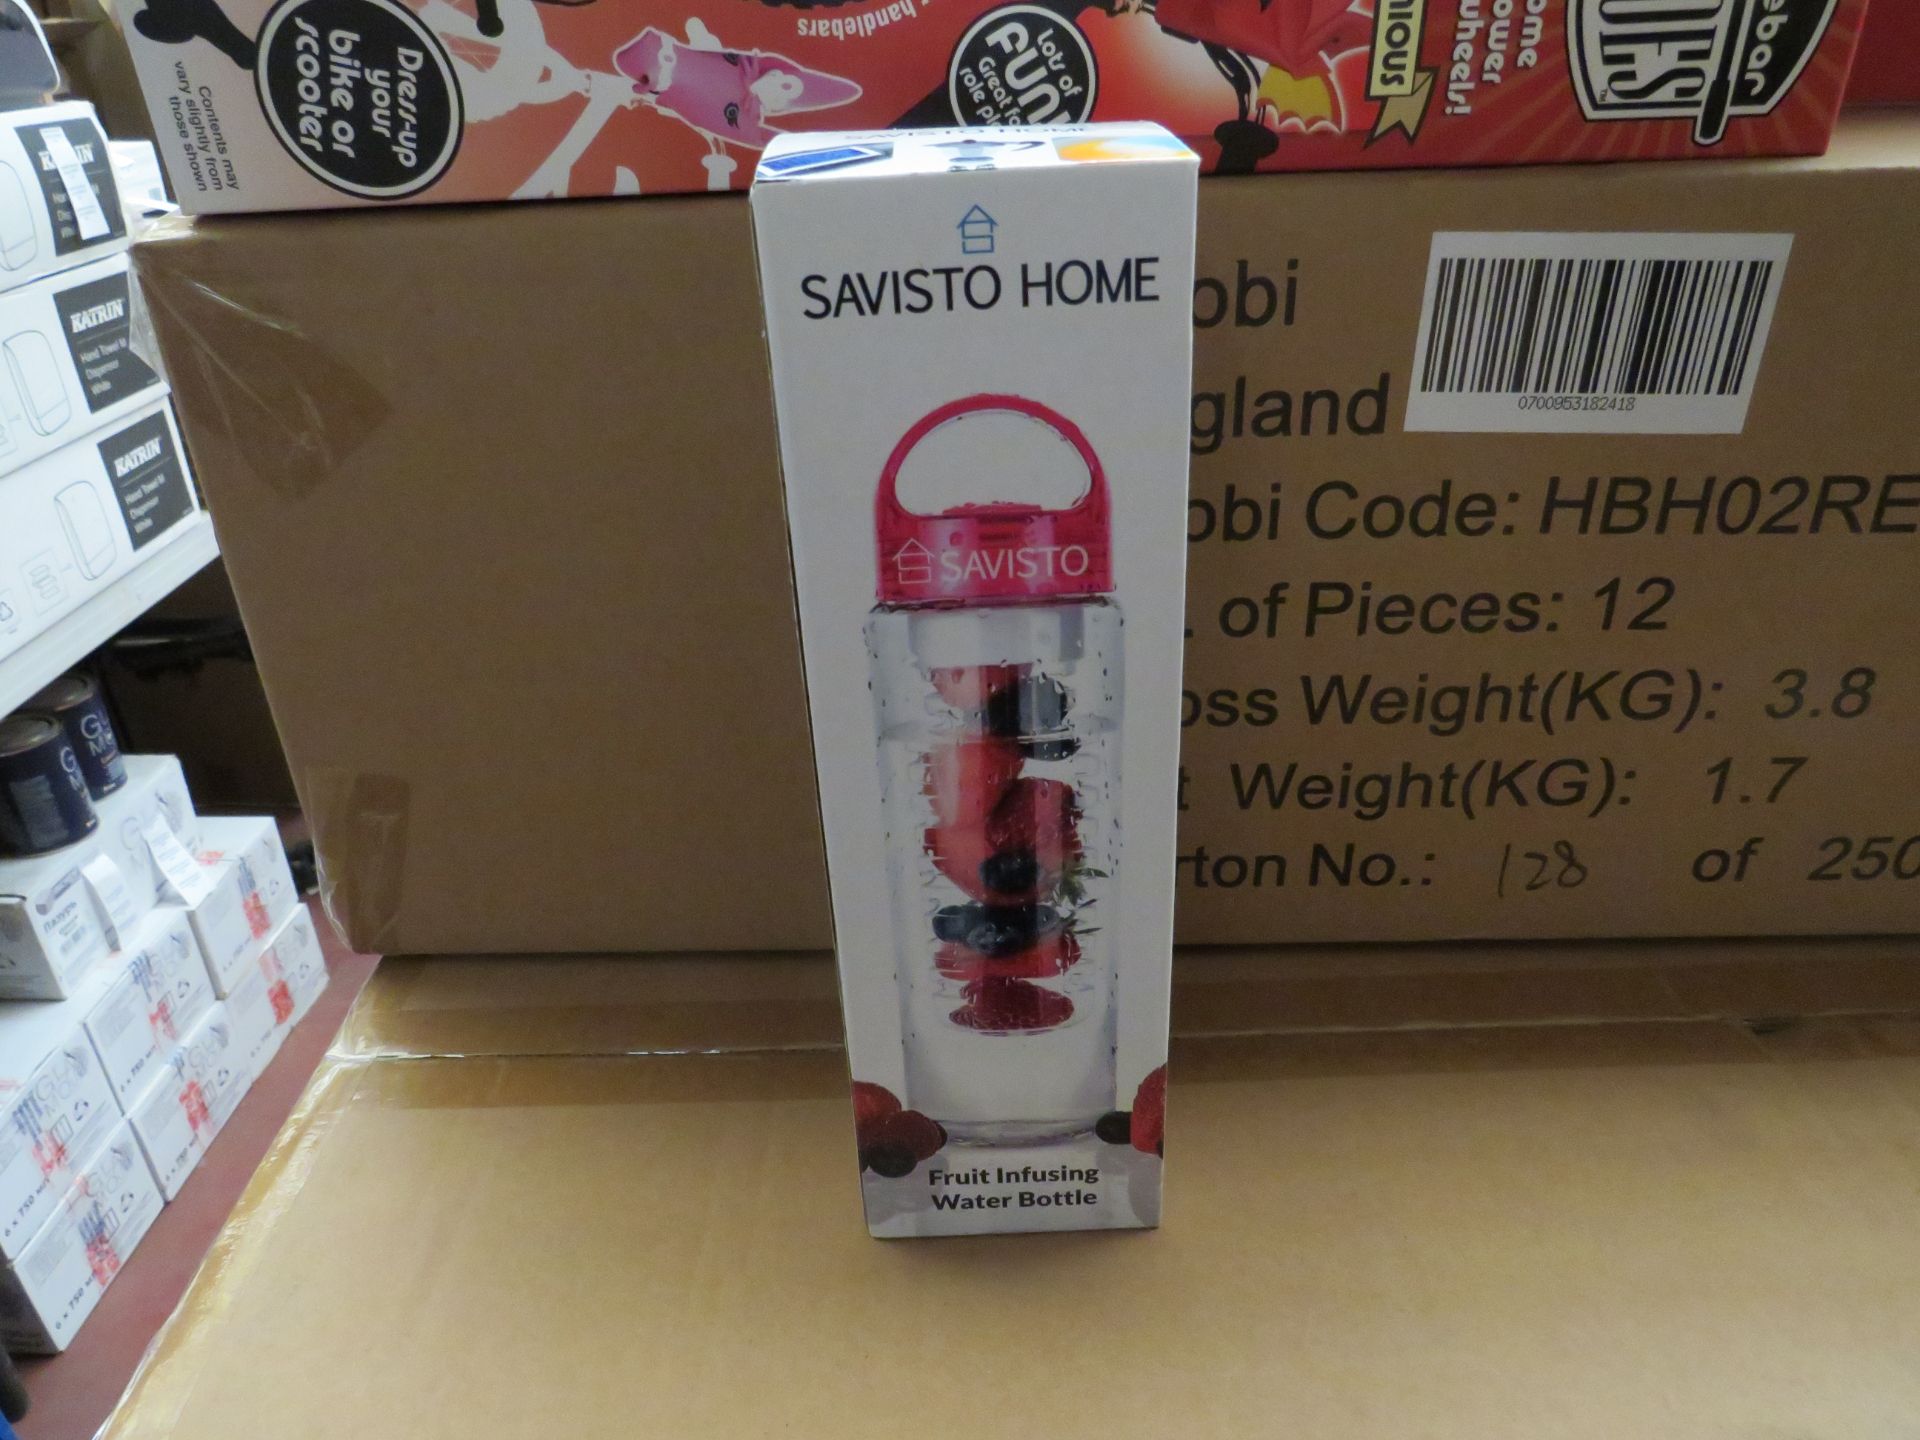 Savisto Home - Fruit Infusing Water Bottle - Unchecked & Boxed.